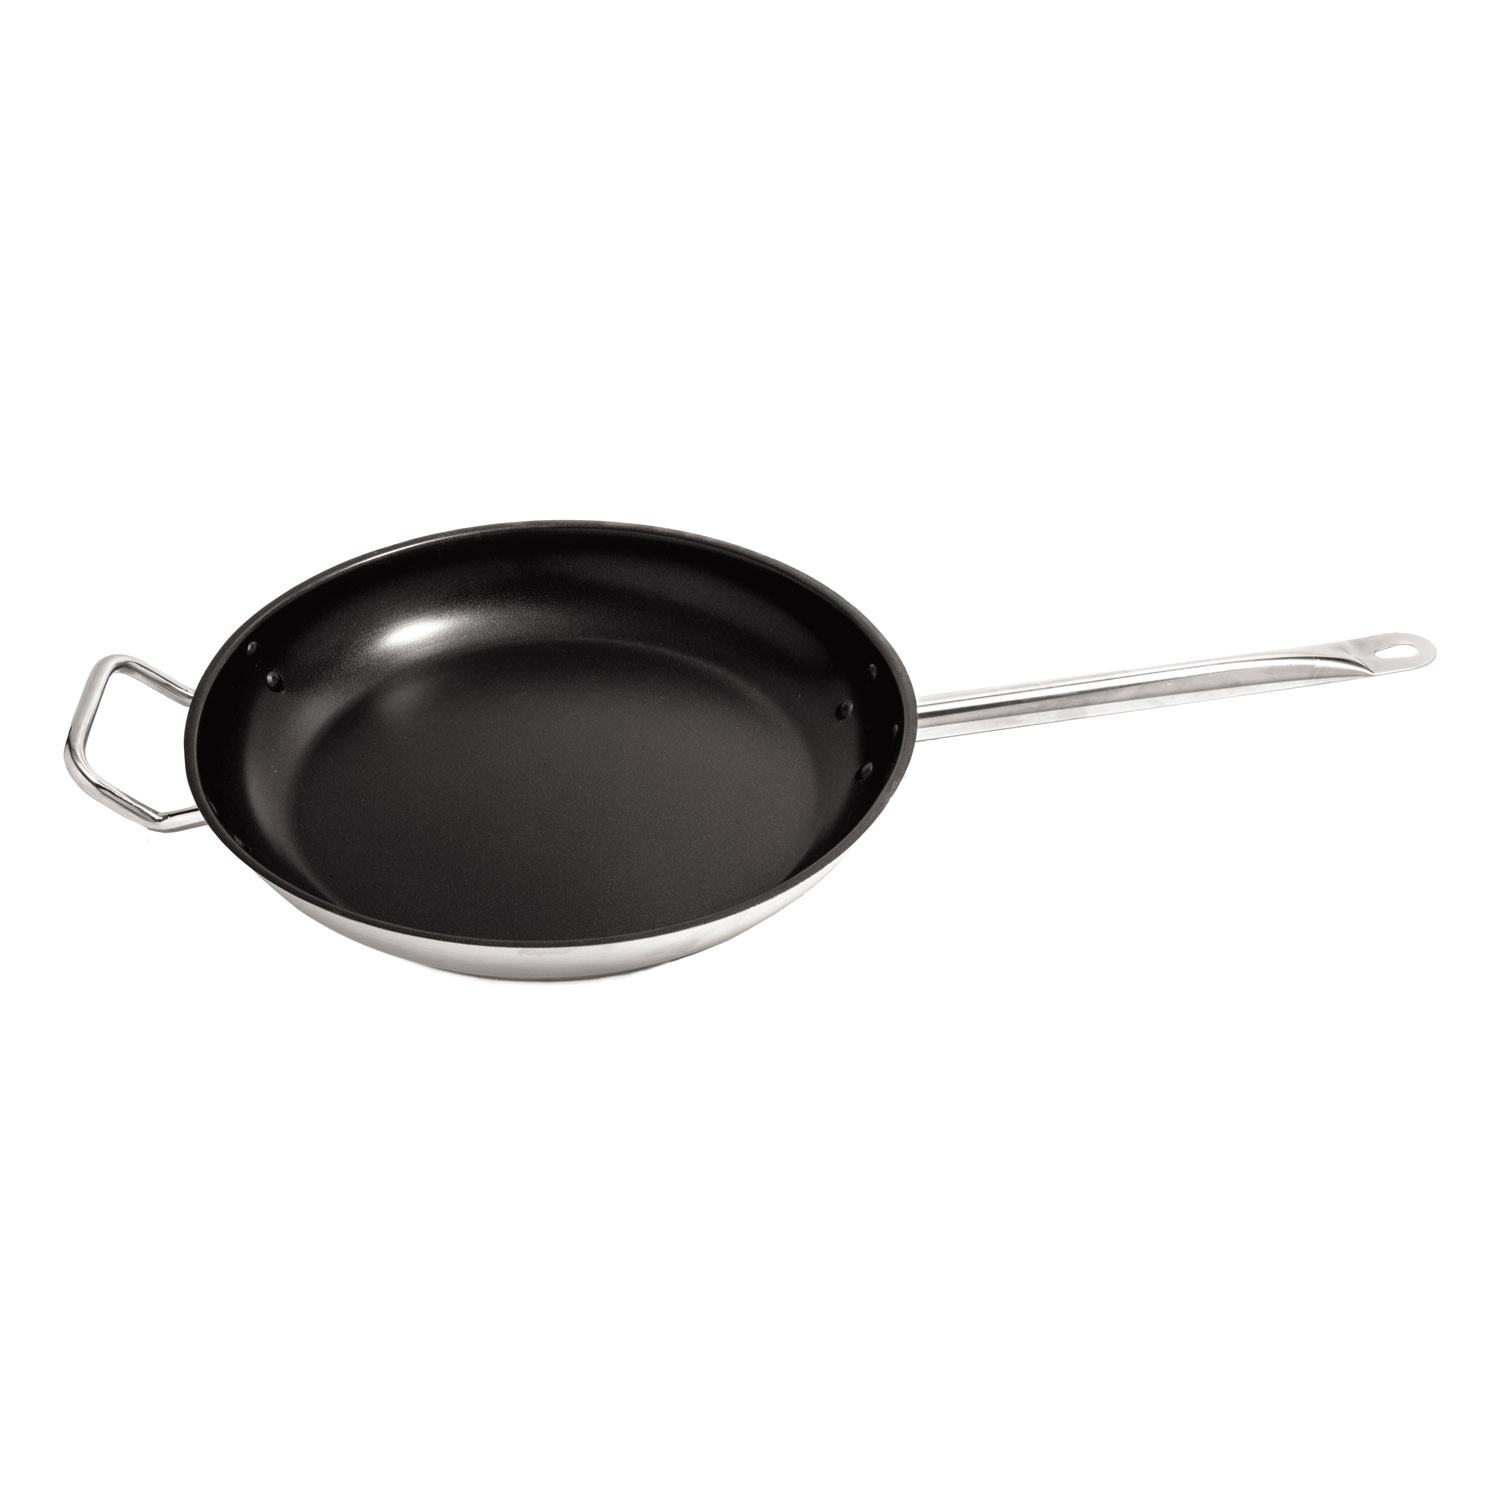 CAC China S2FP-14HN Stainless Steel Non-Stick Fry Pan with Helper Handle 14"